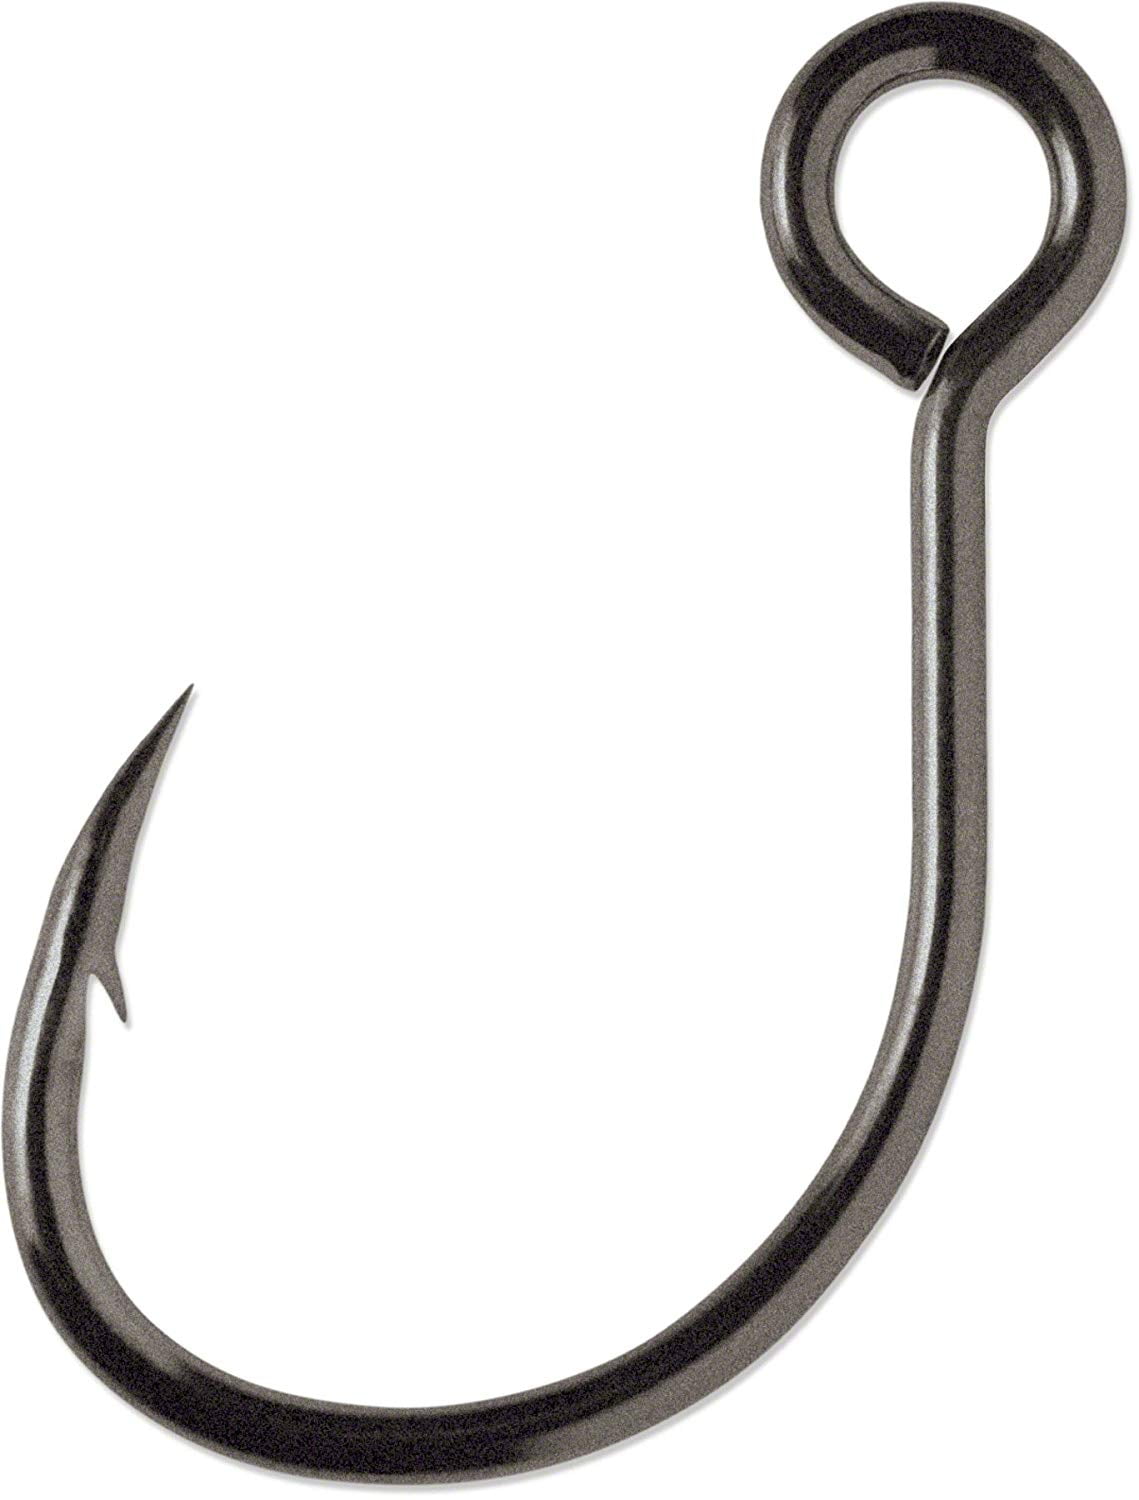 VMC Inline Single X Strong Large Ring Hook, Size 4/0, 4 Pack - 7237CB#4/0PP  